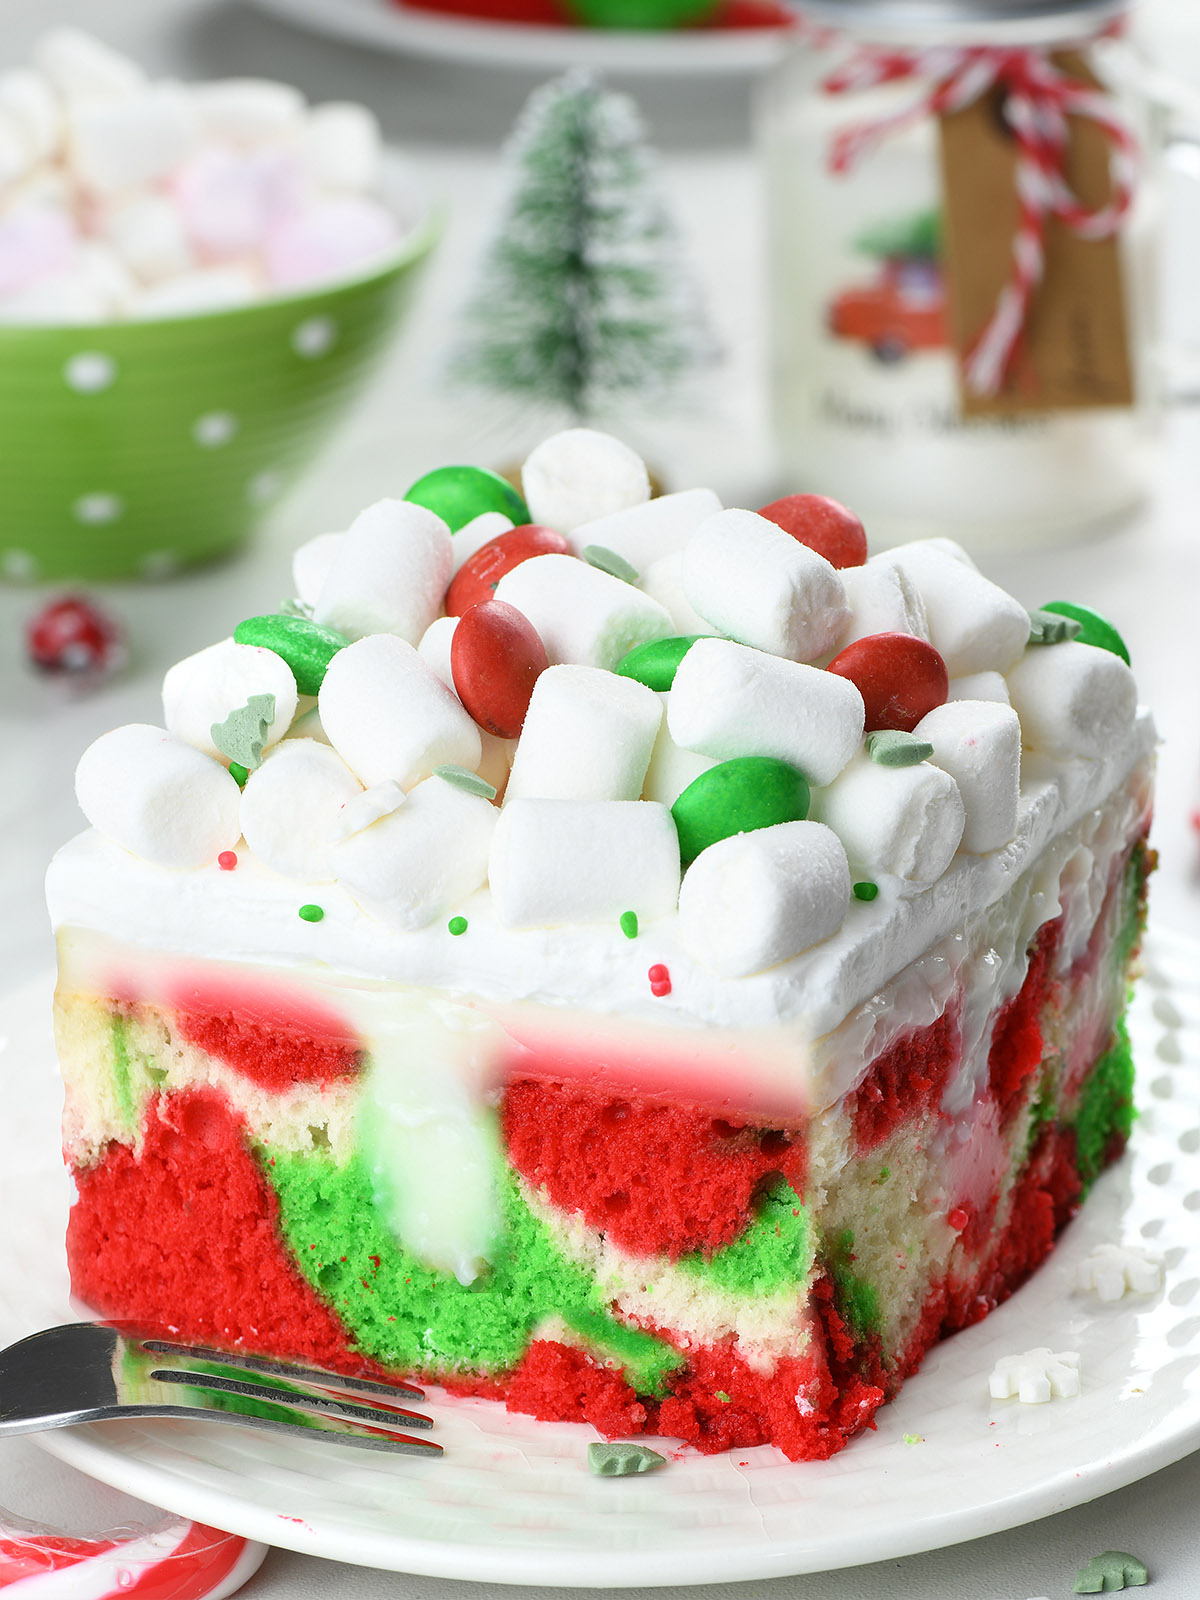 This festive Christmas Confection requires just a few simple ingredients: confection mix, instant pudding, whipped cream, and with a help of supplies coloring, it turns into a fun, and magical poke cake. 